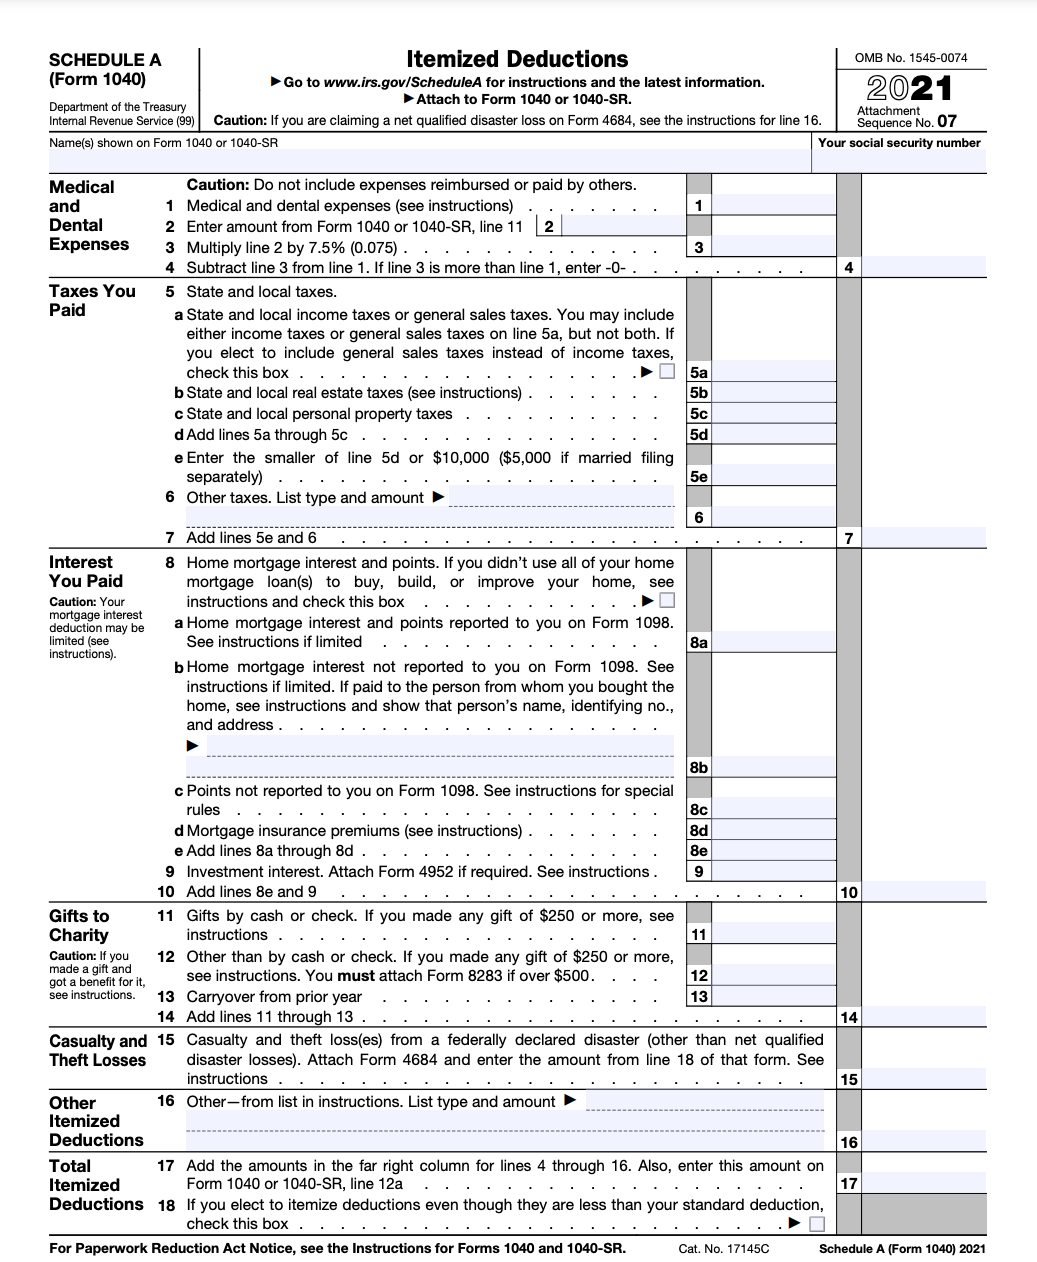 Irs 2022 Schedule 4 Instructions Schedule A (Form 1040): A Guide To The Itemized Deduction | Bench Accounting